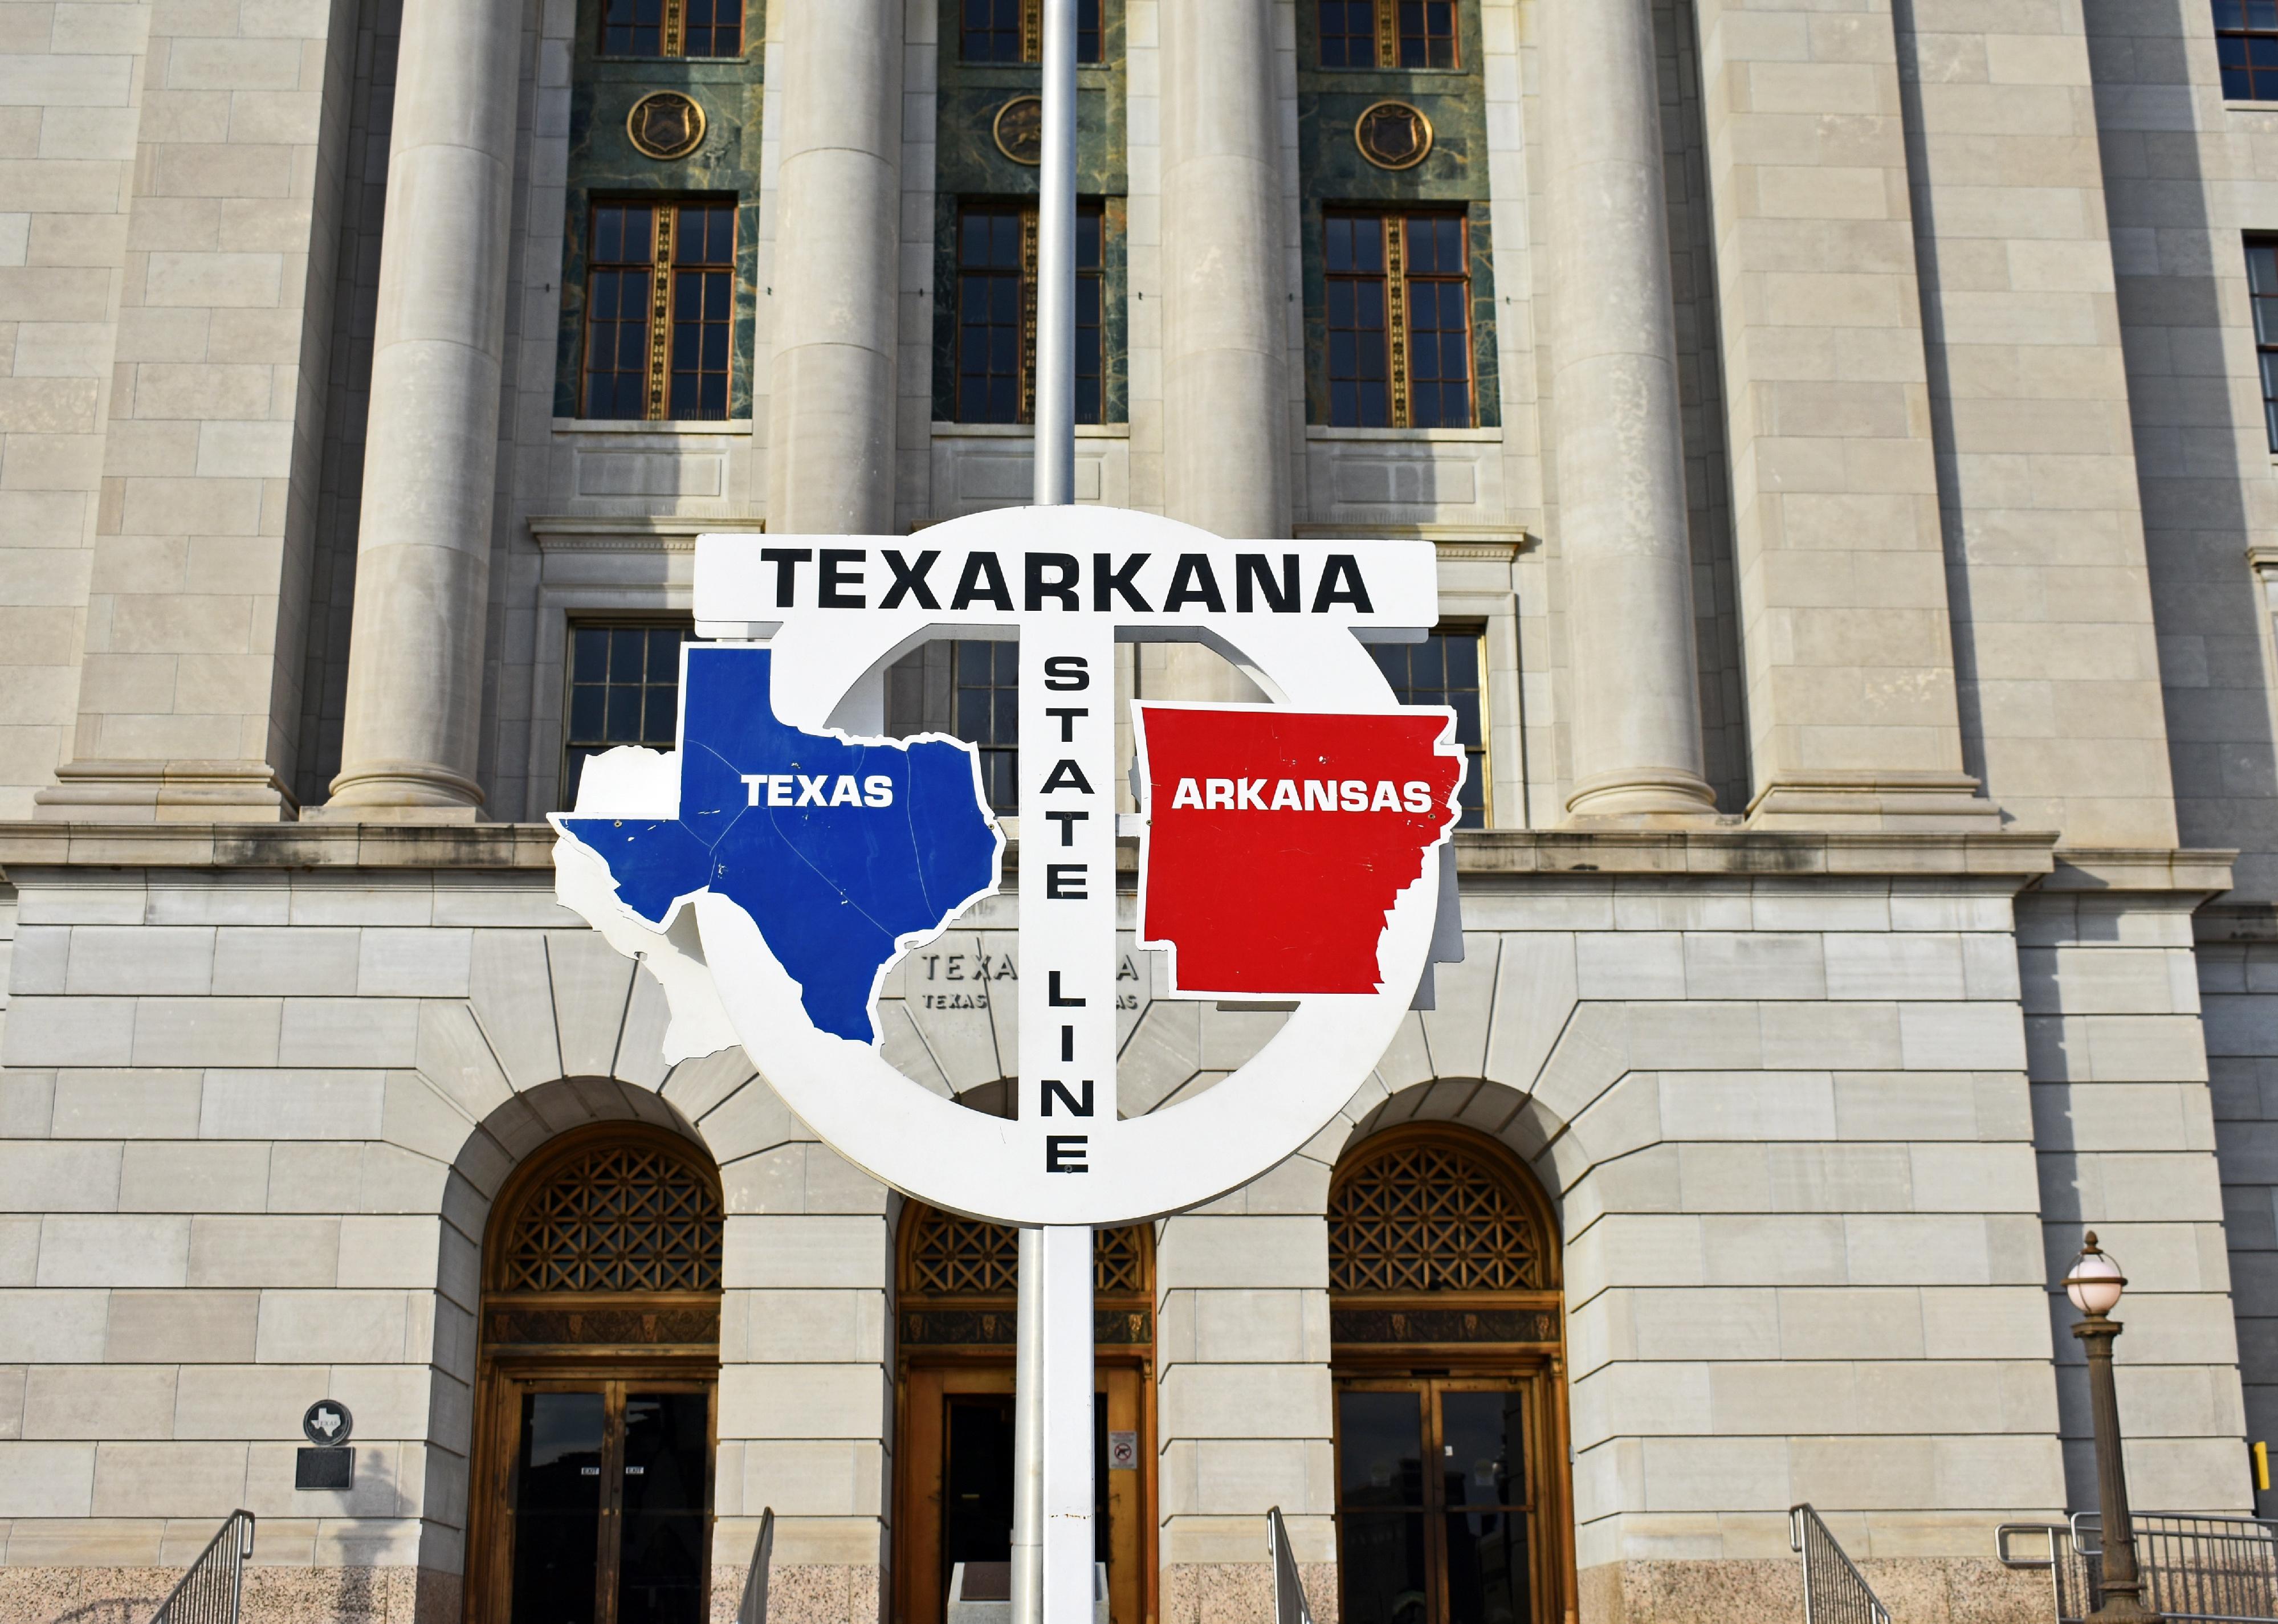 Texarkana, Texas and Arkansas State Line in front of Post Office.